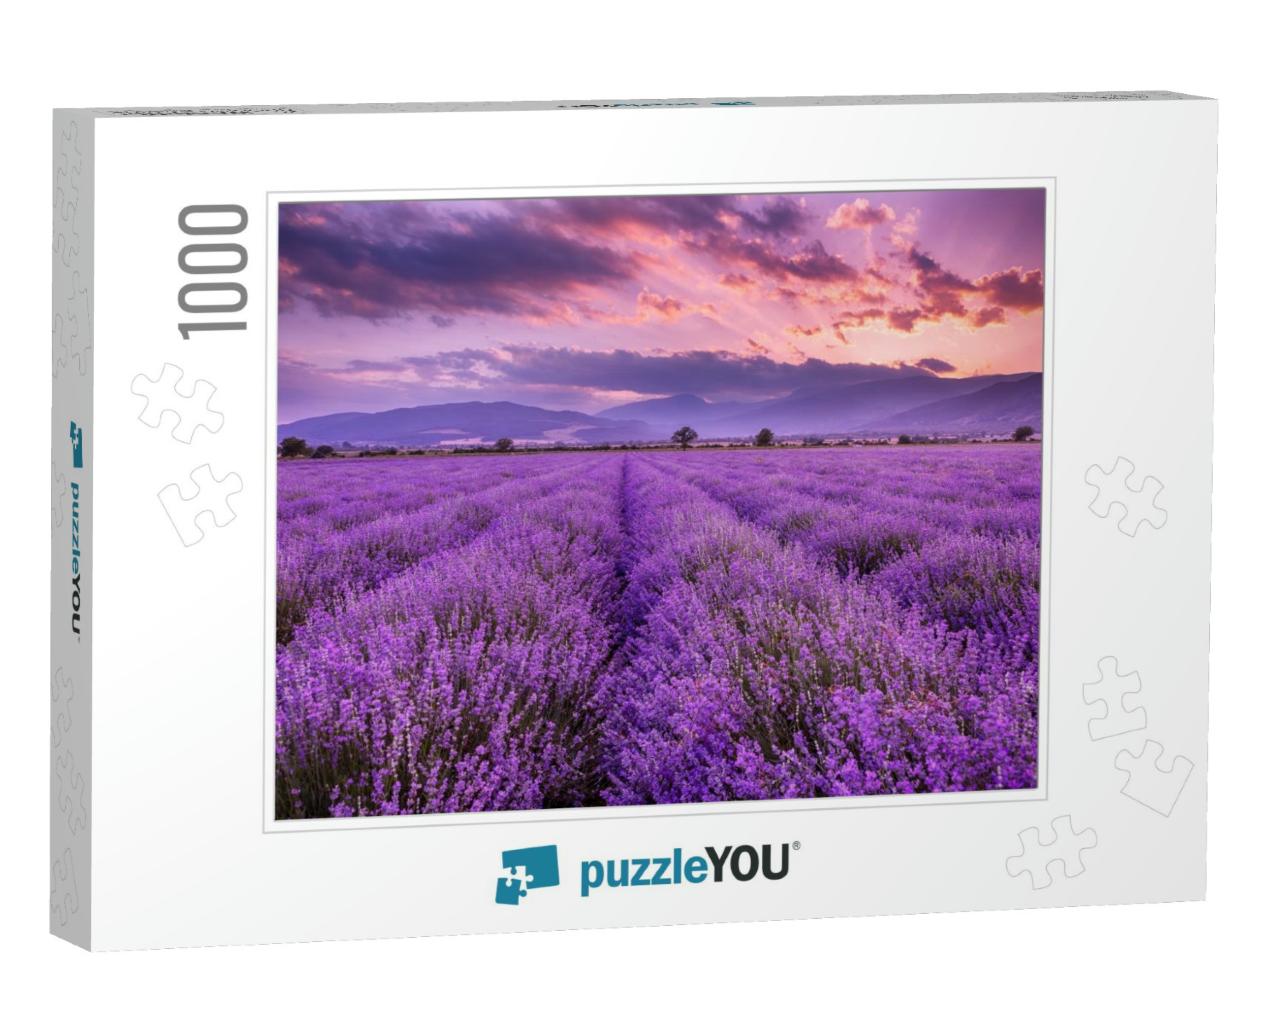 Lavender Field Sunset & Lines... Jigsaw Puzzle with 1000 pieces